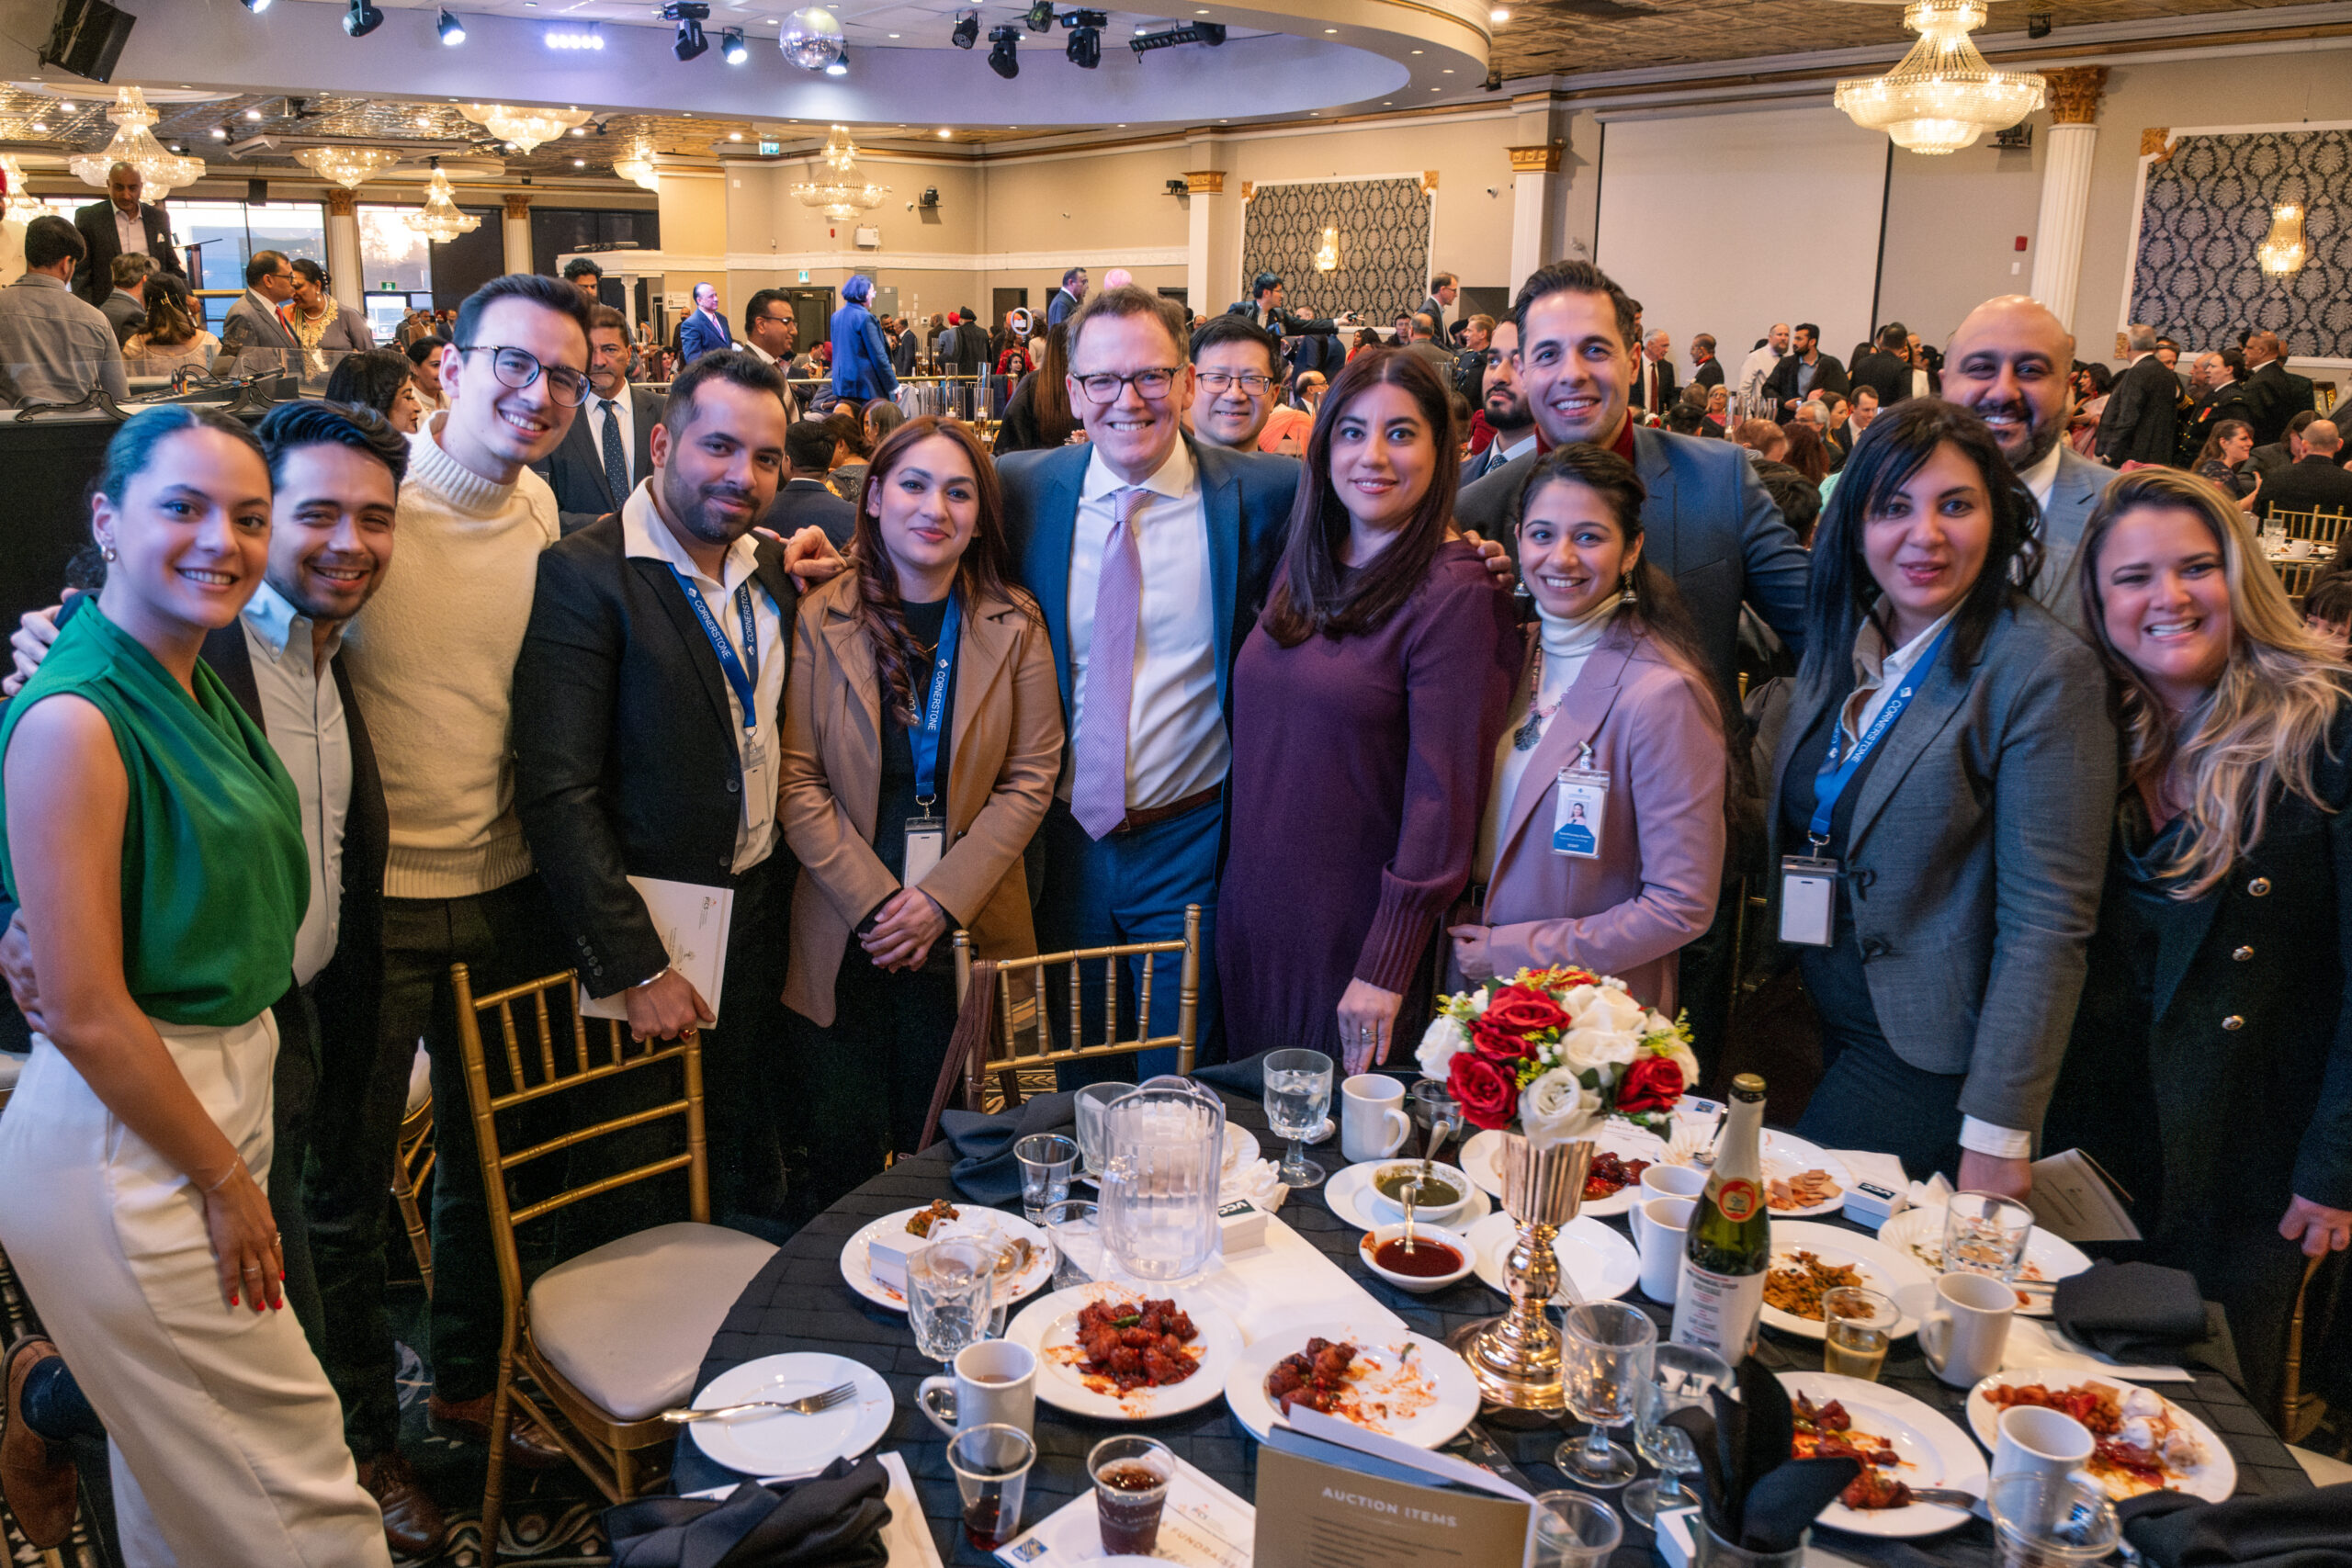 CICCC attended the Friends of PICS Gala as an auction sponsor